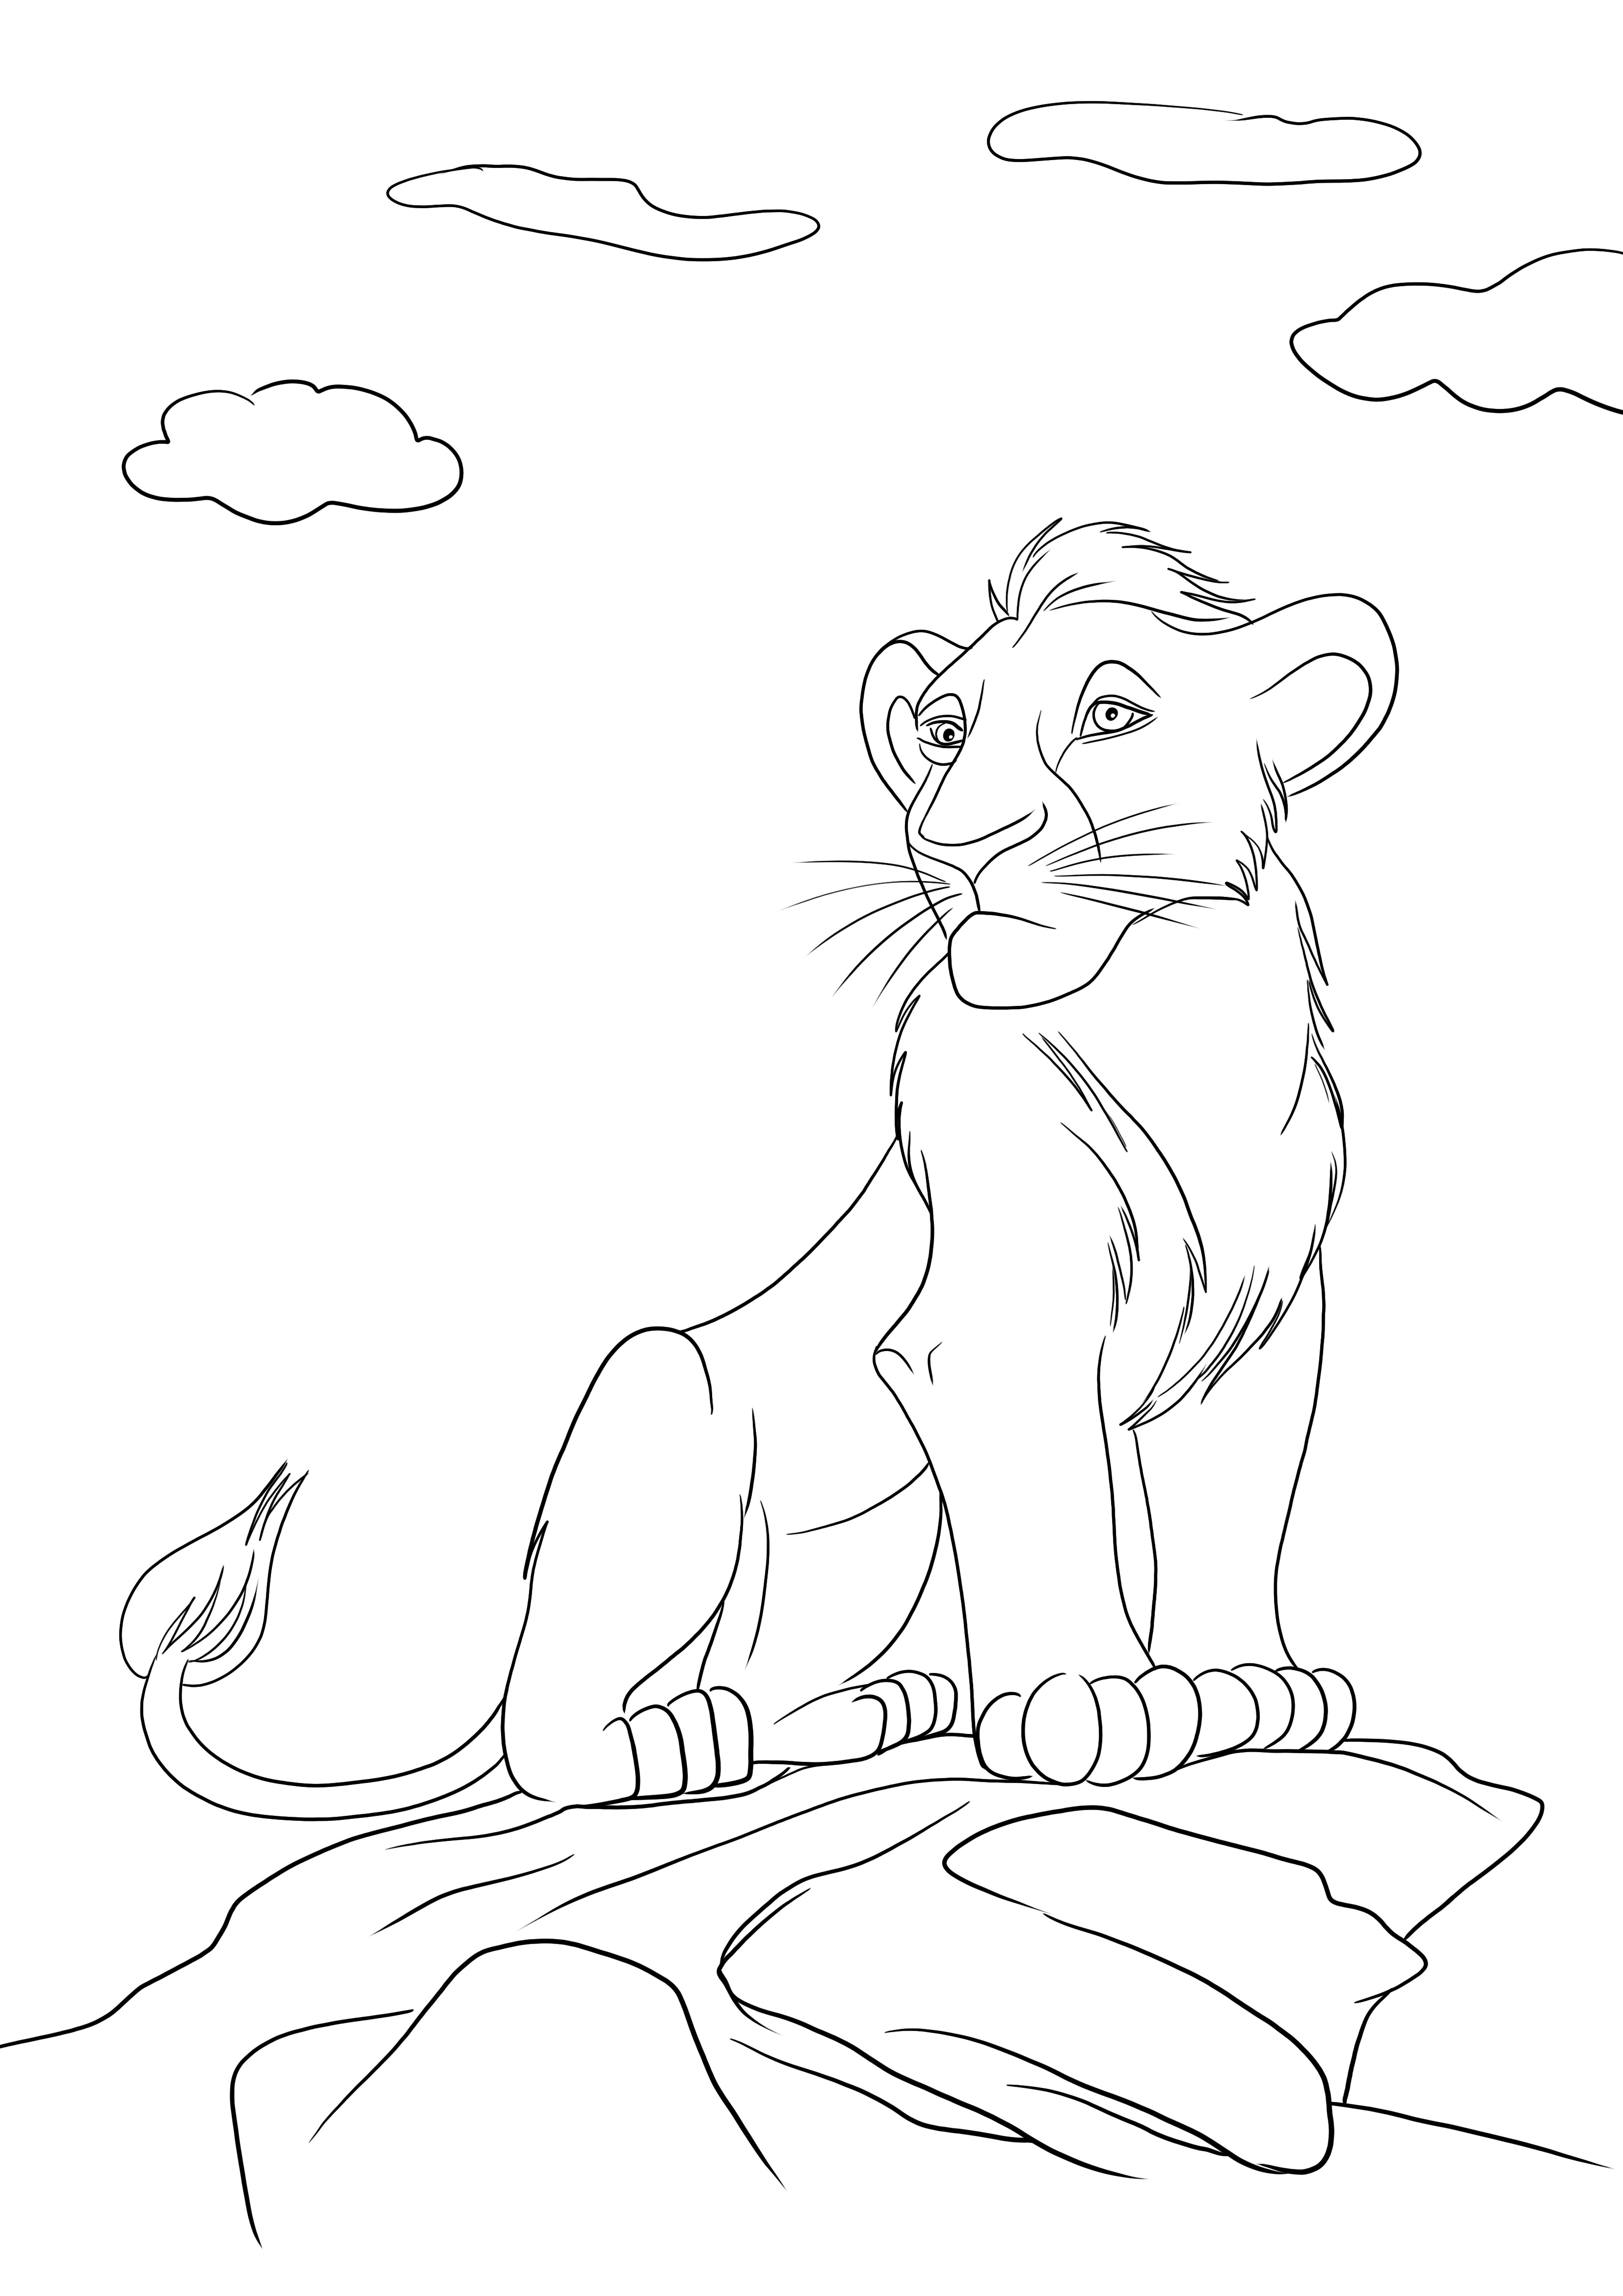 Young Simba coloring image to print for free and easy to color for kids